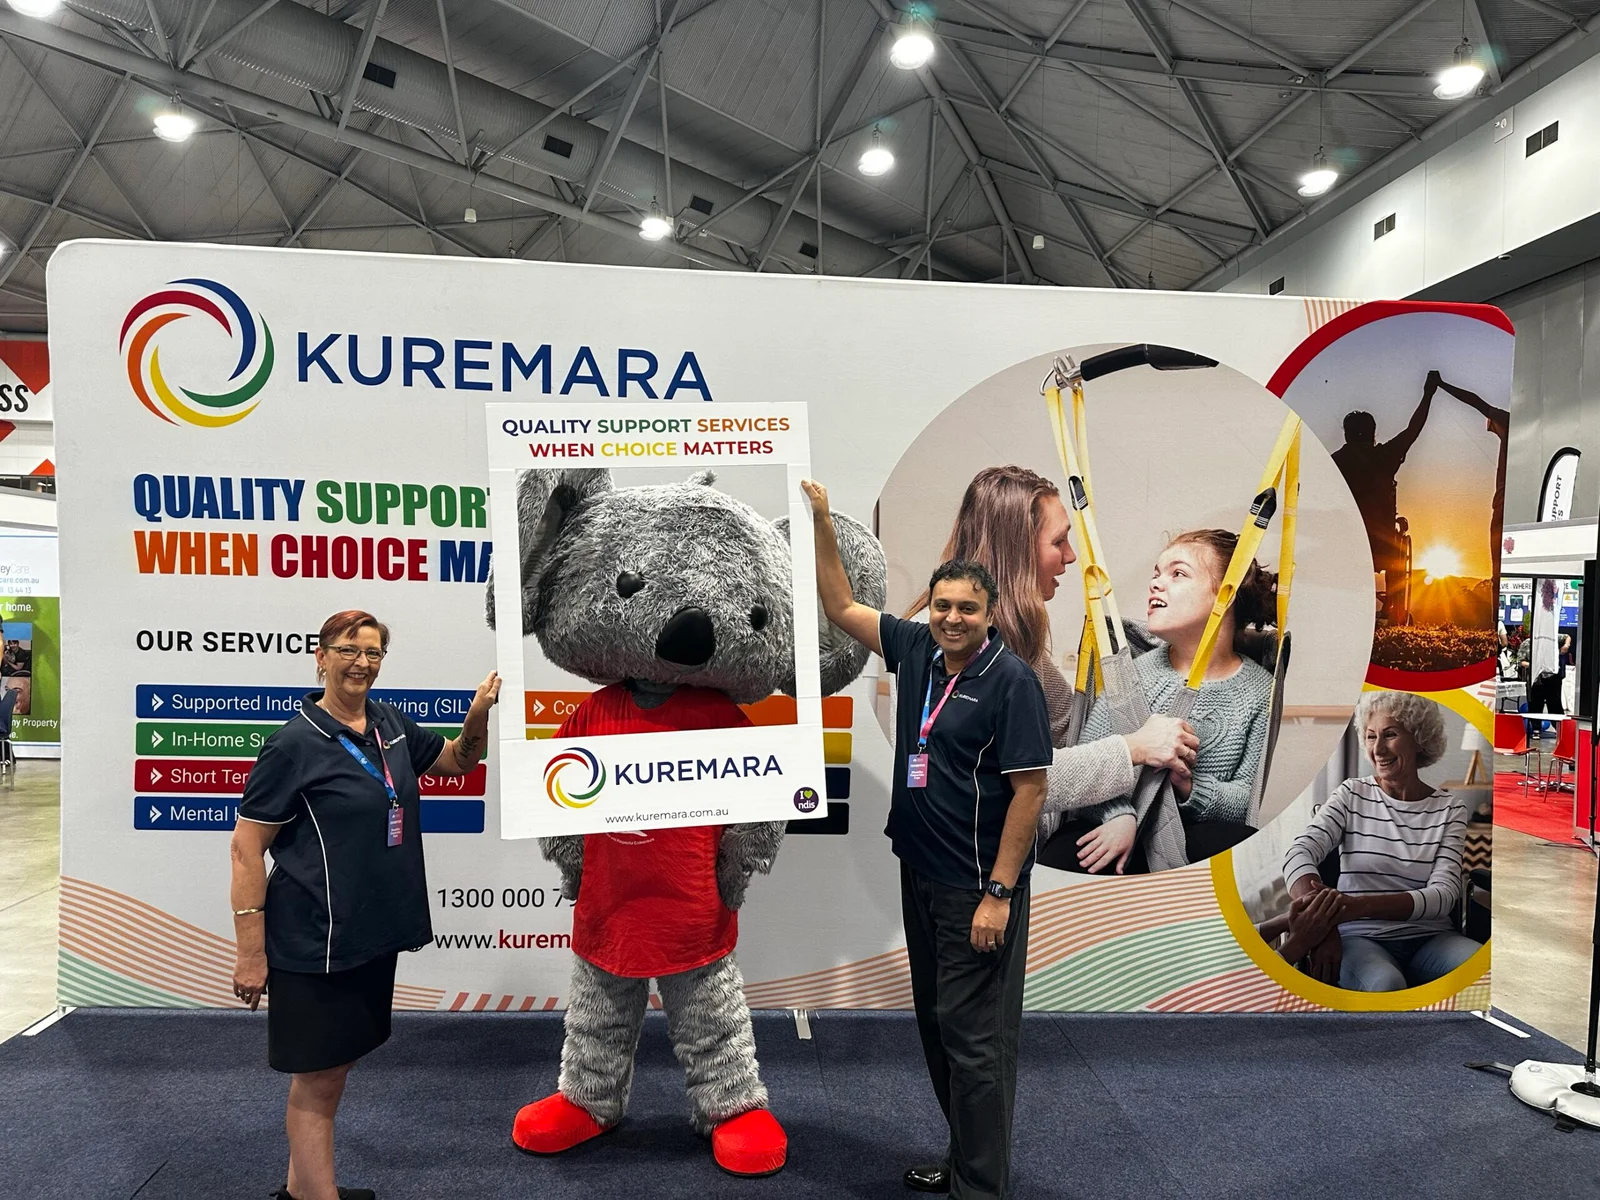 Kuremara Team Posing at Stand with ConnectionFEST Mascot